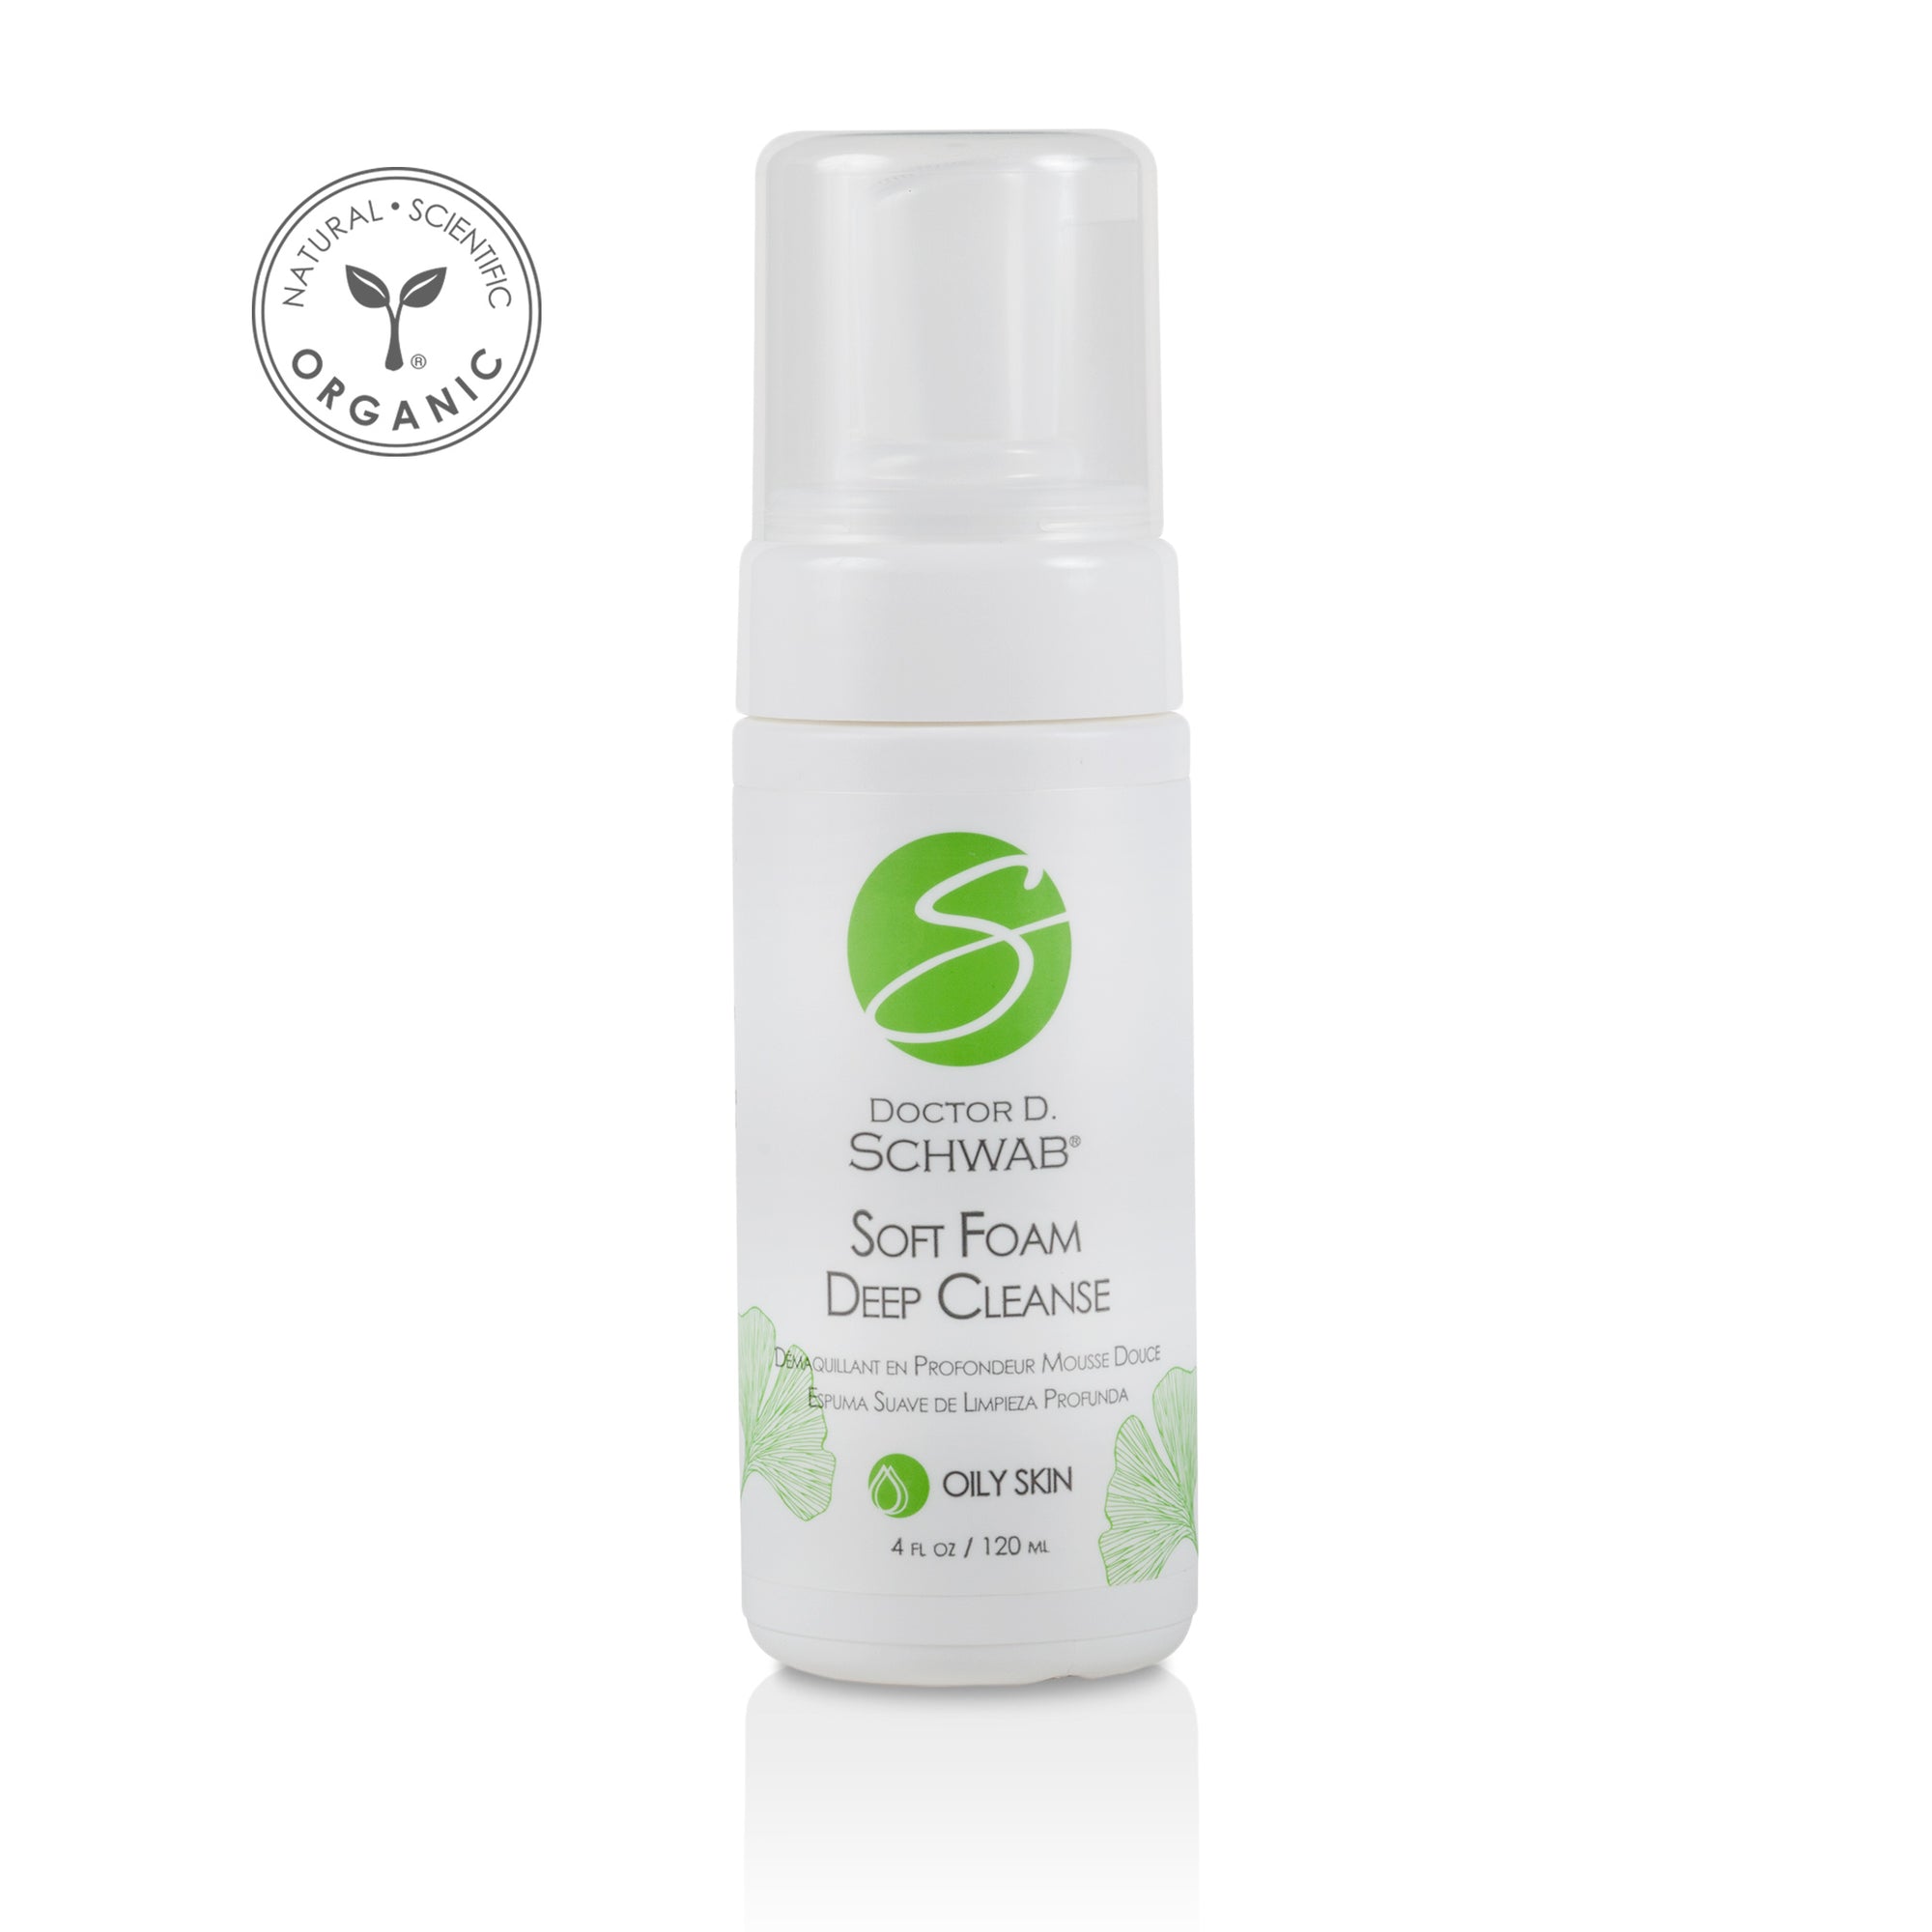 Soft Foam Deep Cleanse with Tea Tree Oil - For Oily & Blemished Skin Types